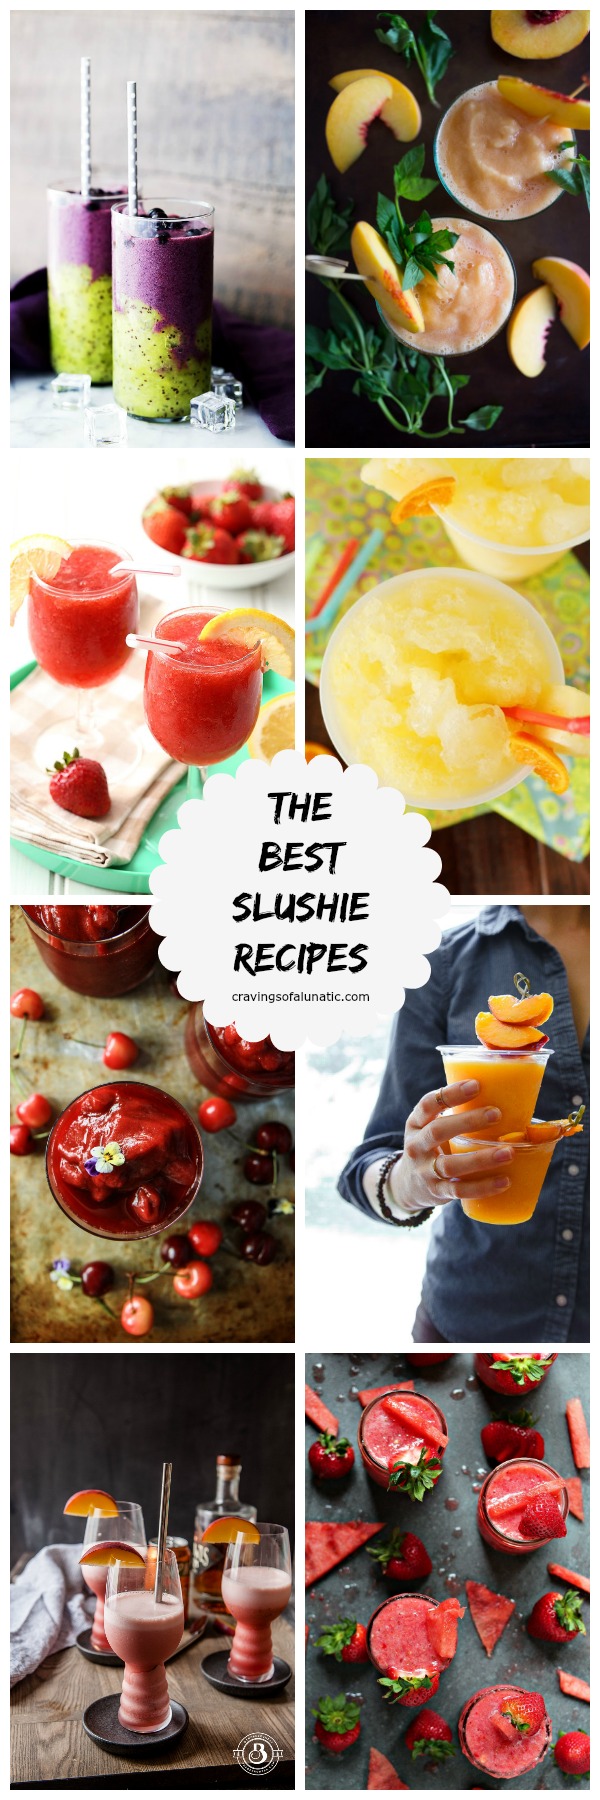 The Best Slushie Recipes featured on cravingsofalunatic.com- Make your summer extra special by making all of The Best Slushie Recipes you possibly can. Nothing screams summer like shaved ice with fruity flavours!